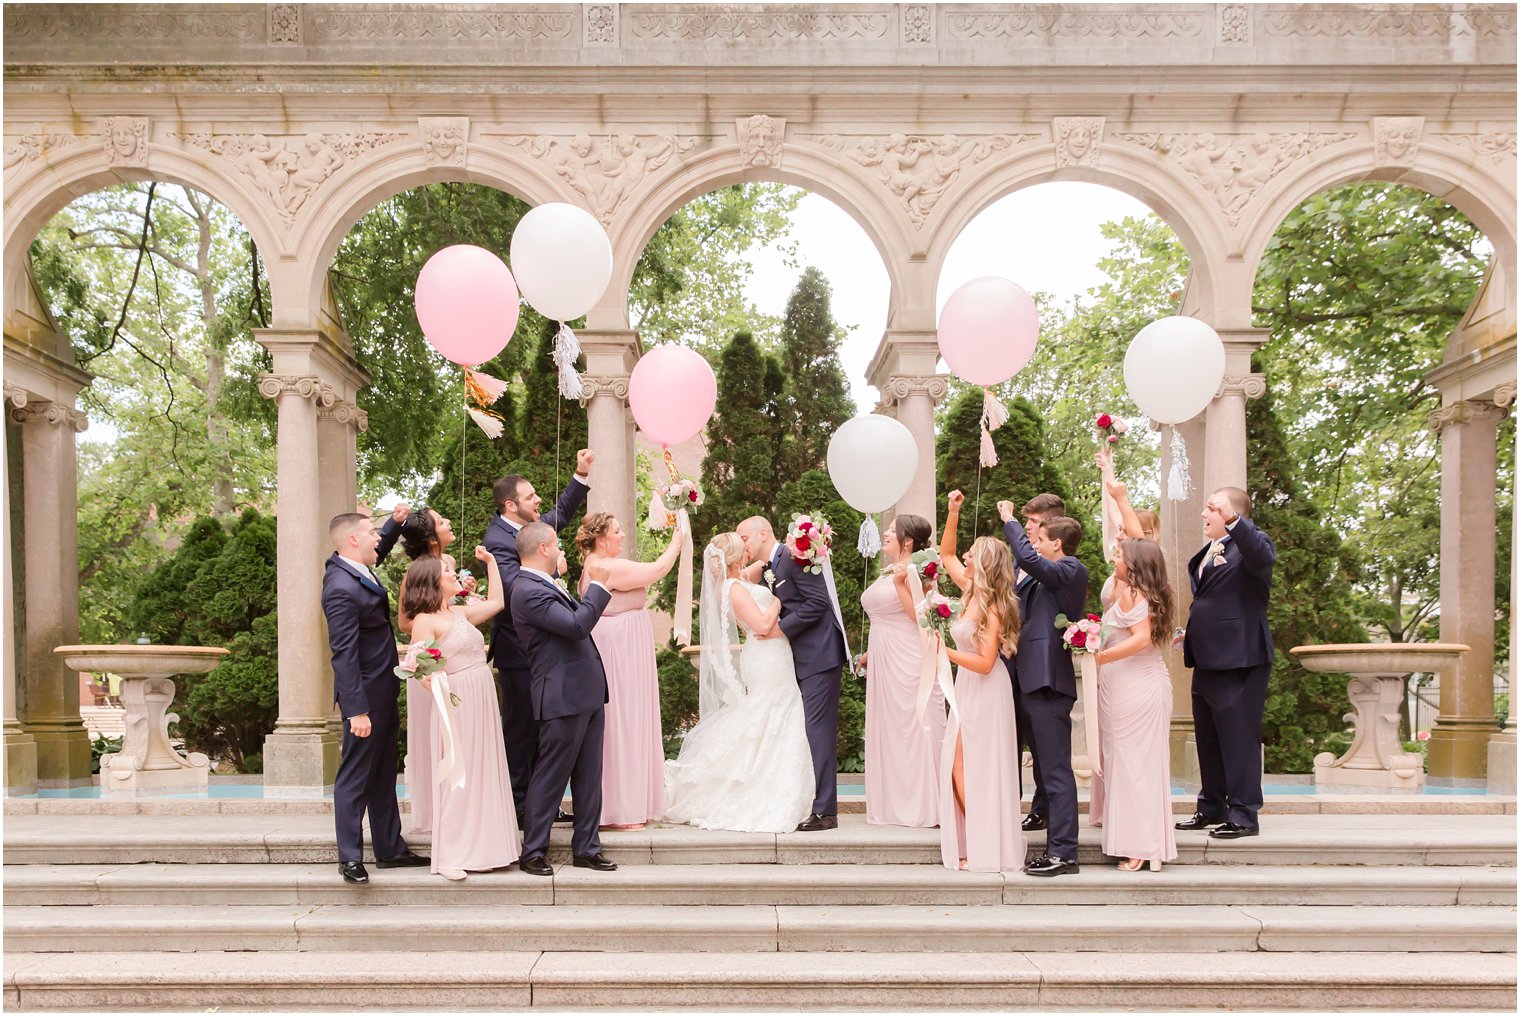 Bridal party photo with balloons